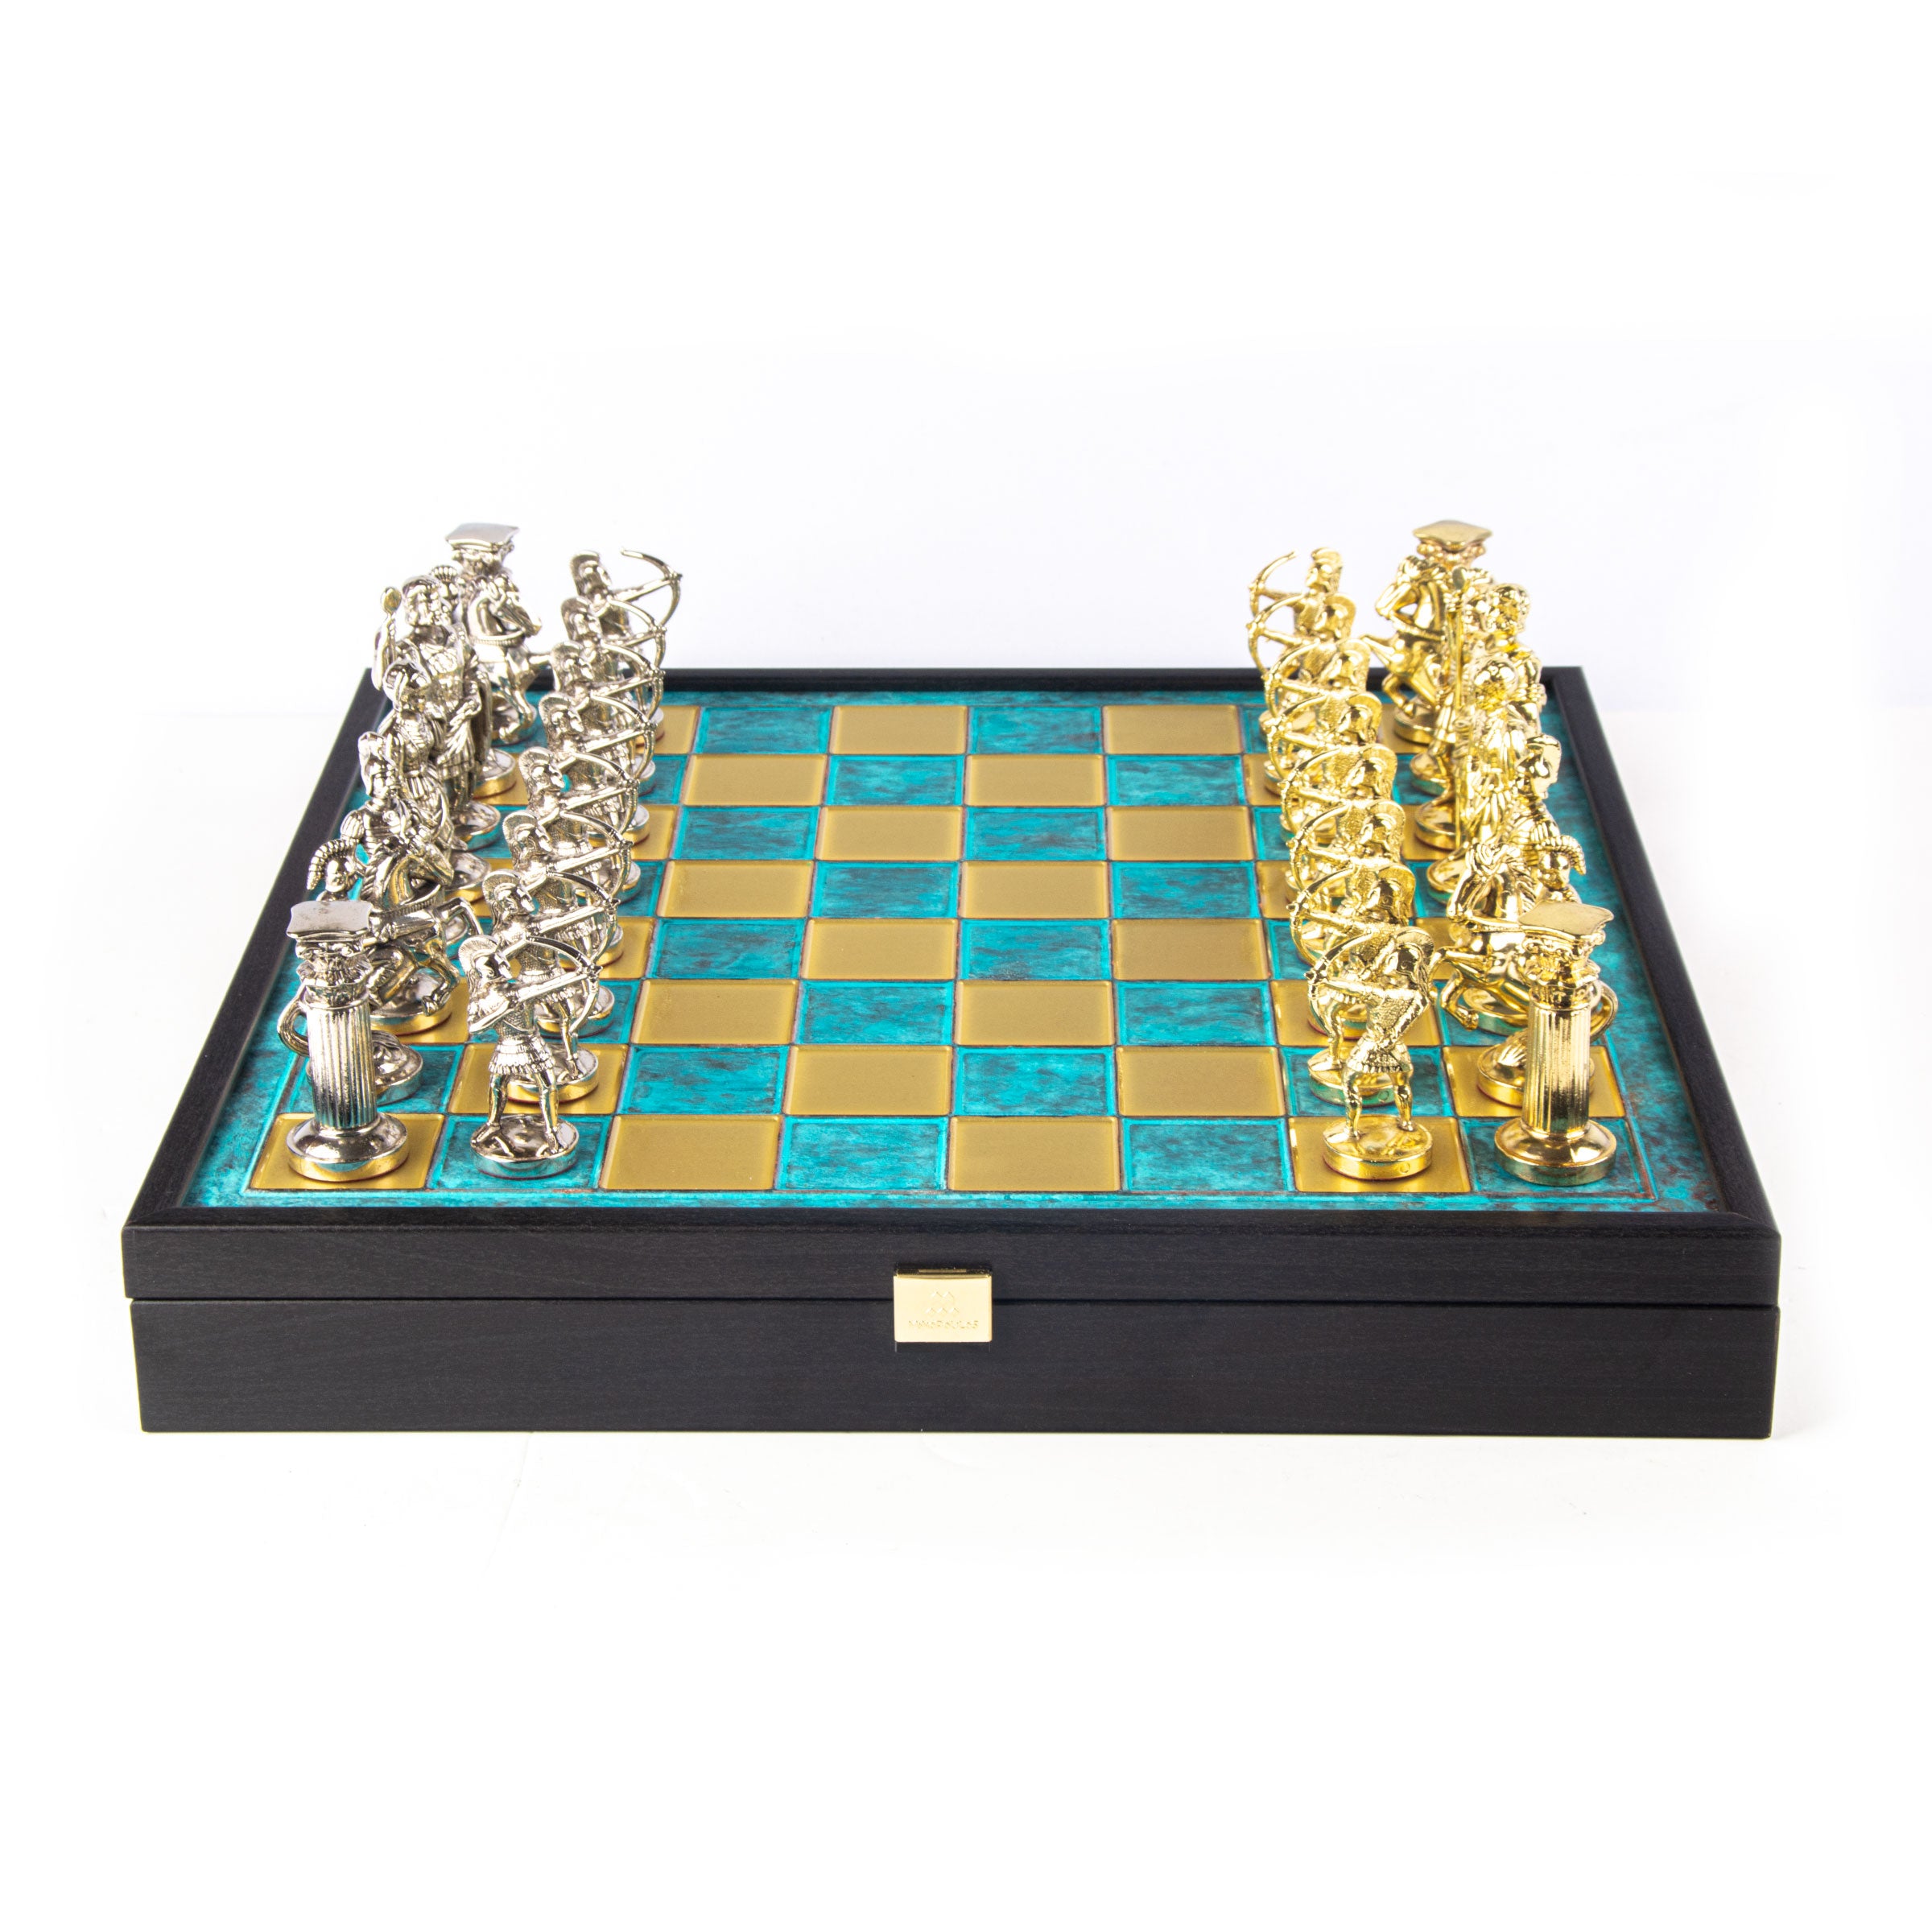 The Manopoulos Archers Luxury Chess Set with Wooden Case [S10RED